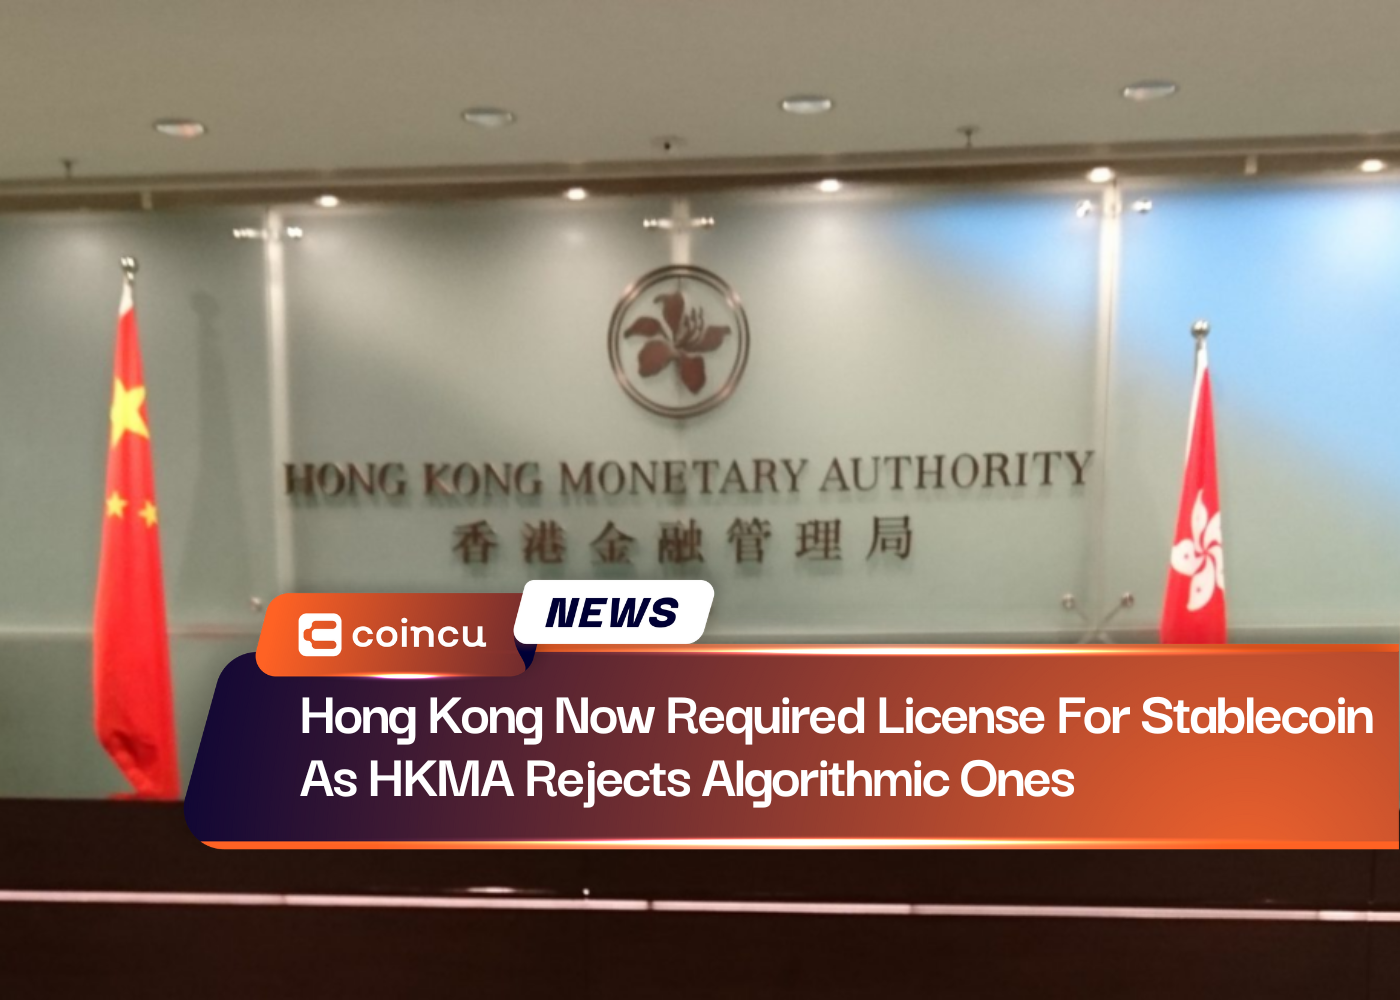 Hong Kong Now Required License For Stablecoin As HKMA Rejects Algorithmic Ones